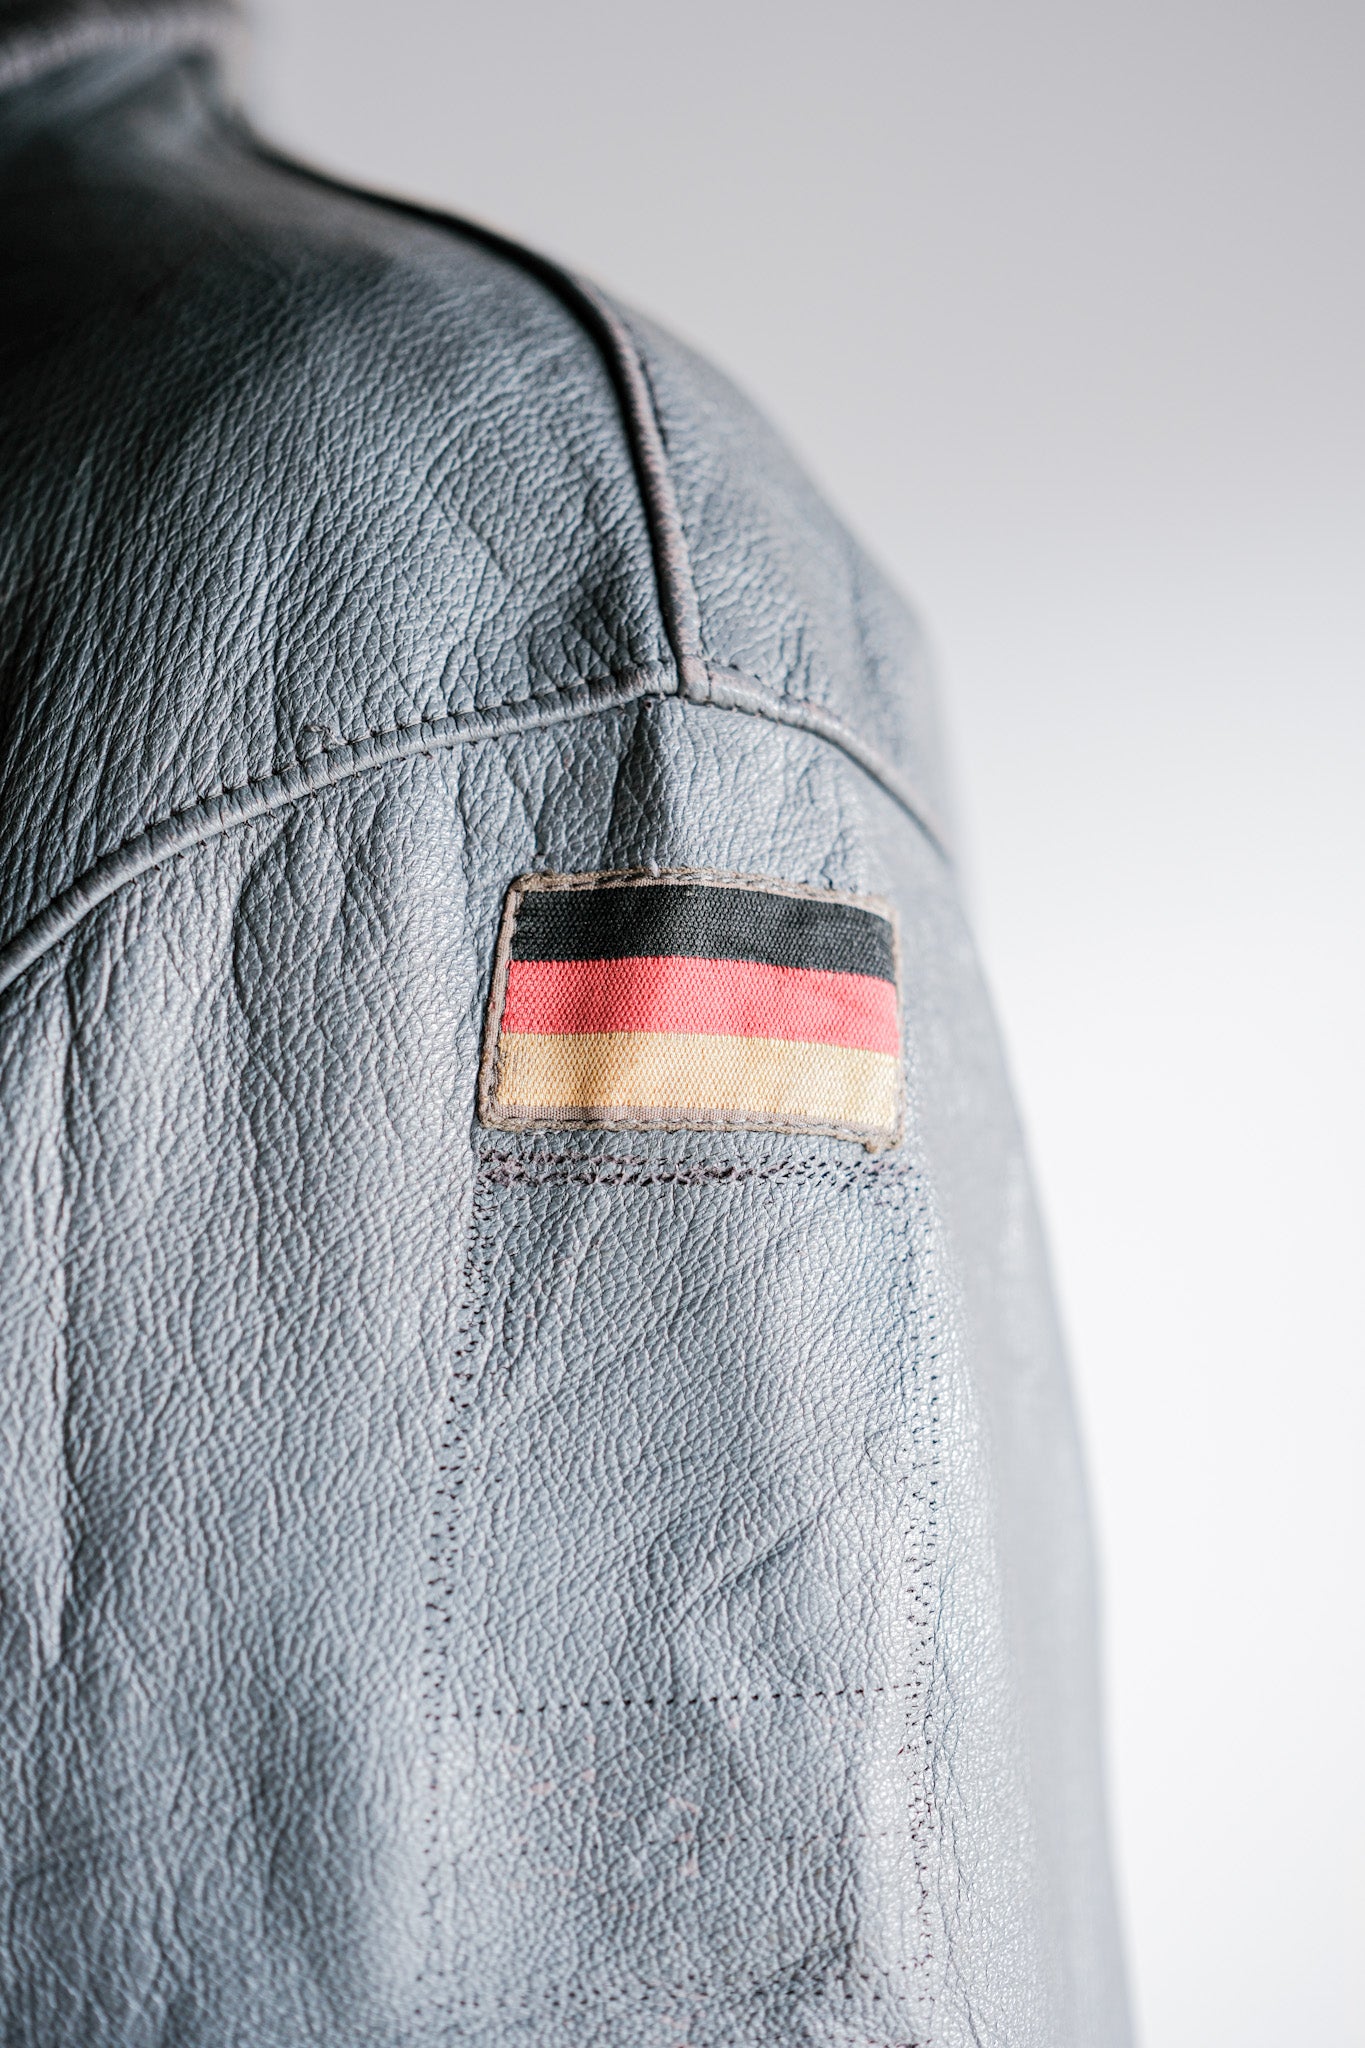 【~70’s】West German Air Force Pilot Leather Jacket With Patches Size.190/100